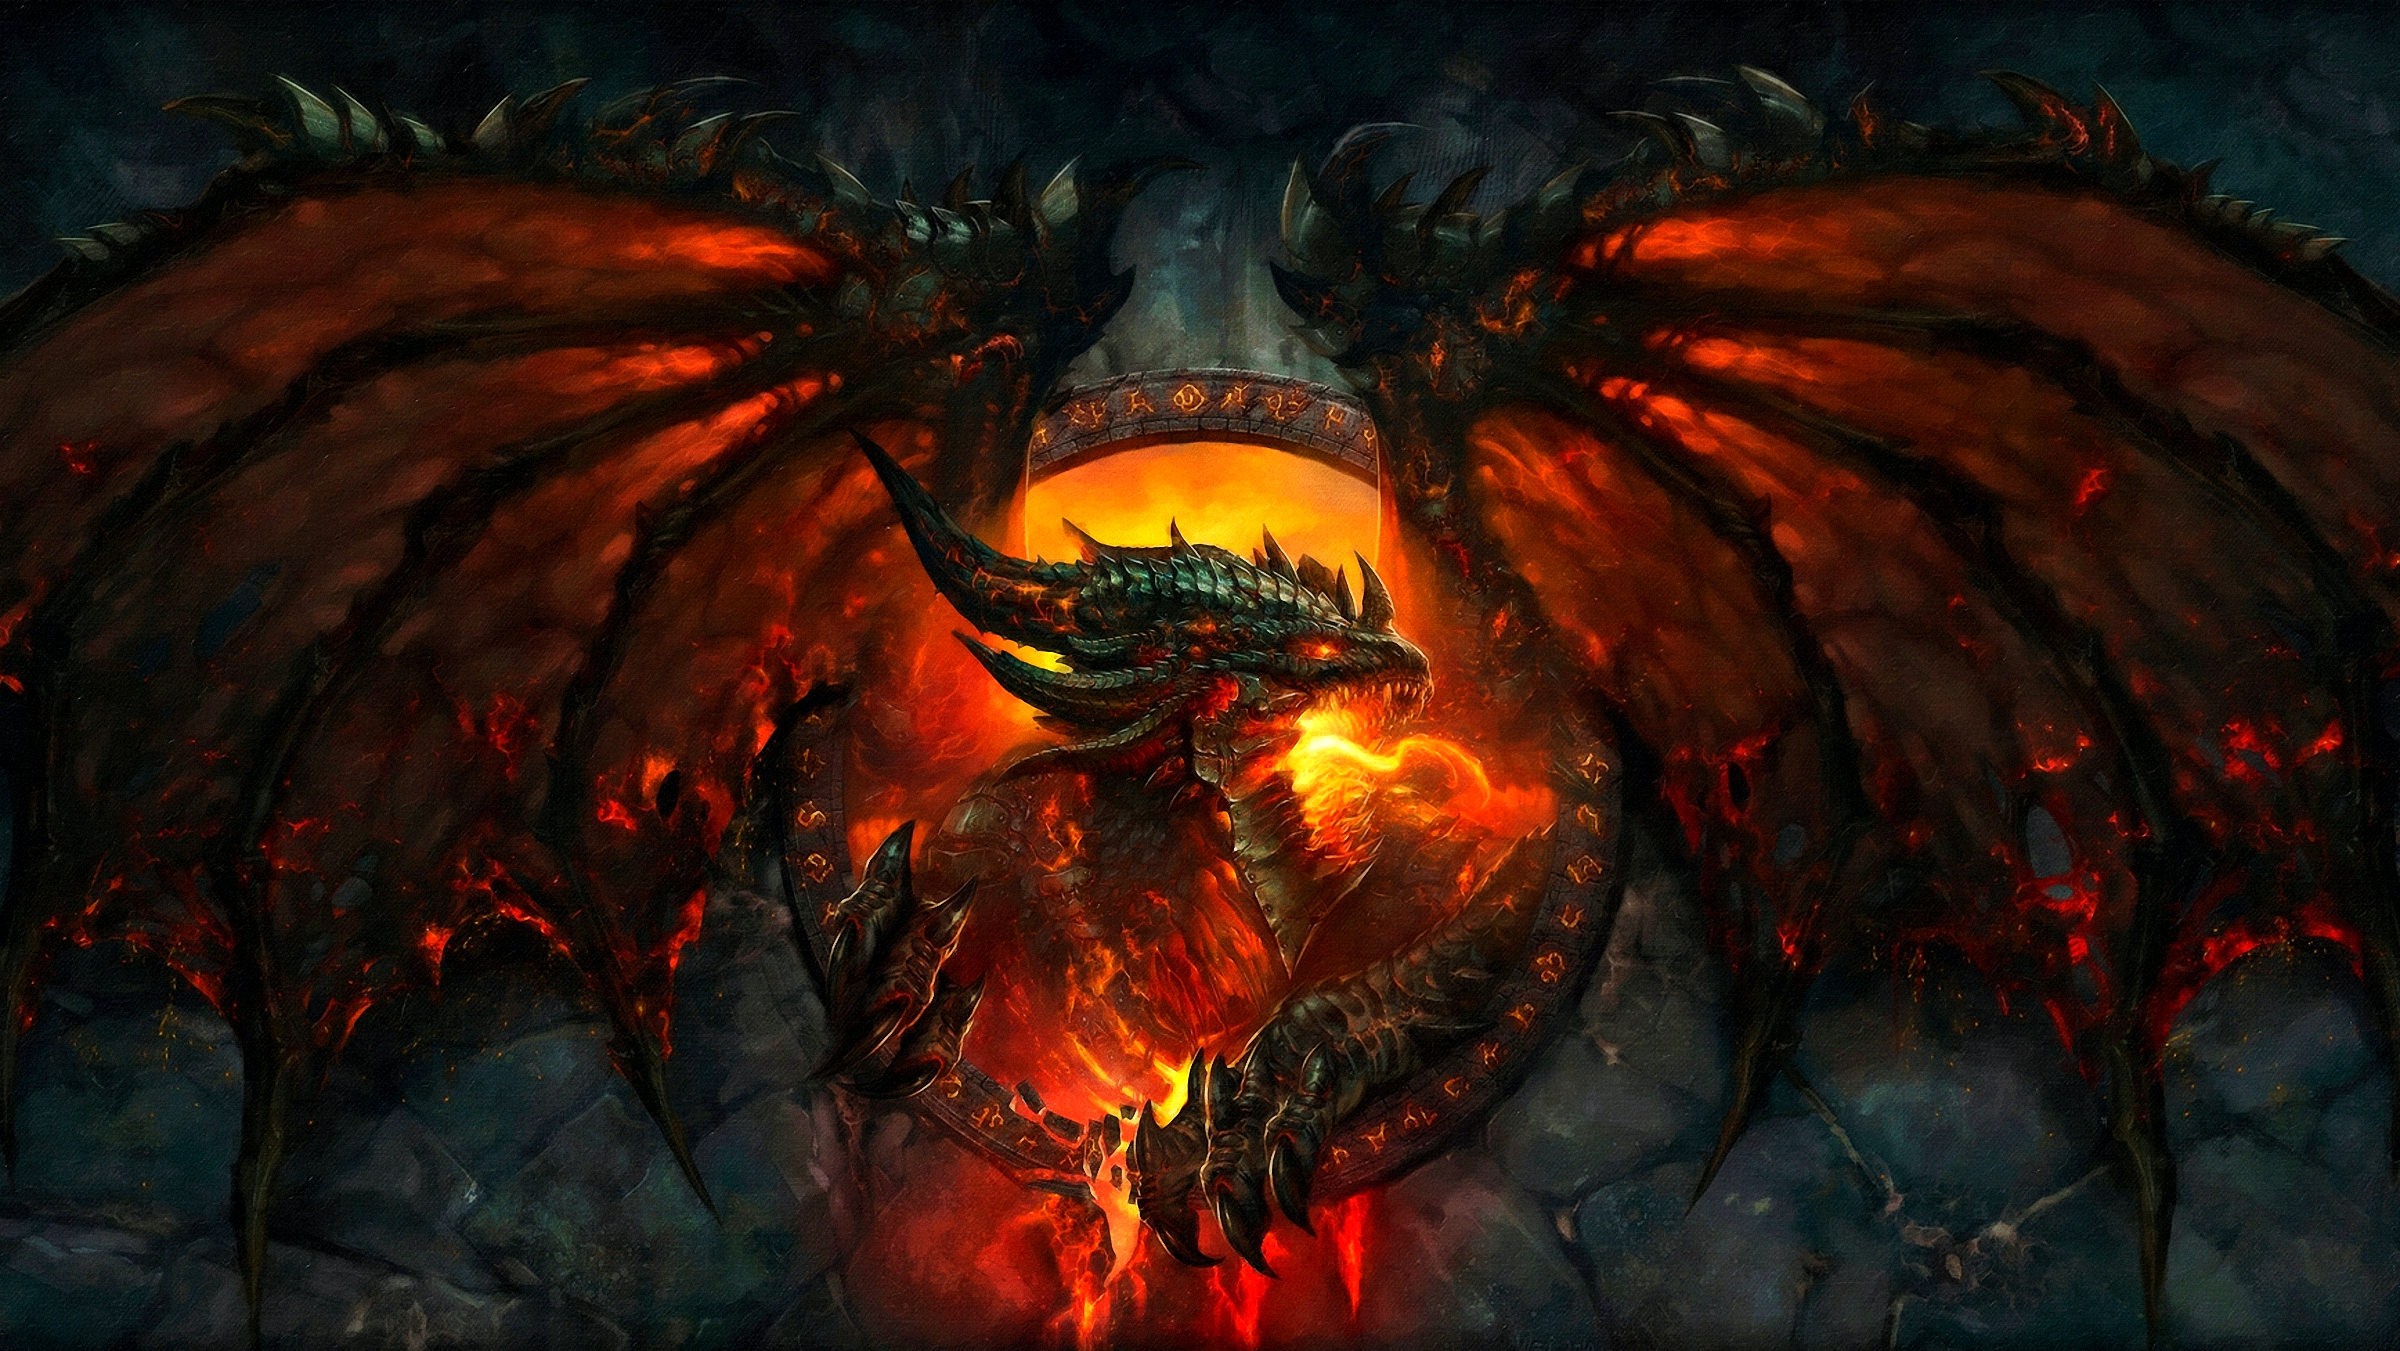 General 2400x1351 World of Warcraft World of Warcraft: Cataclysm Deathwing video game art dragon creature wings fantasy art